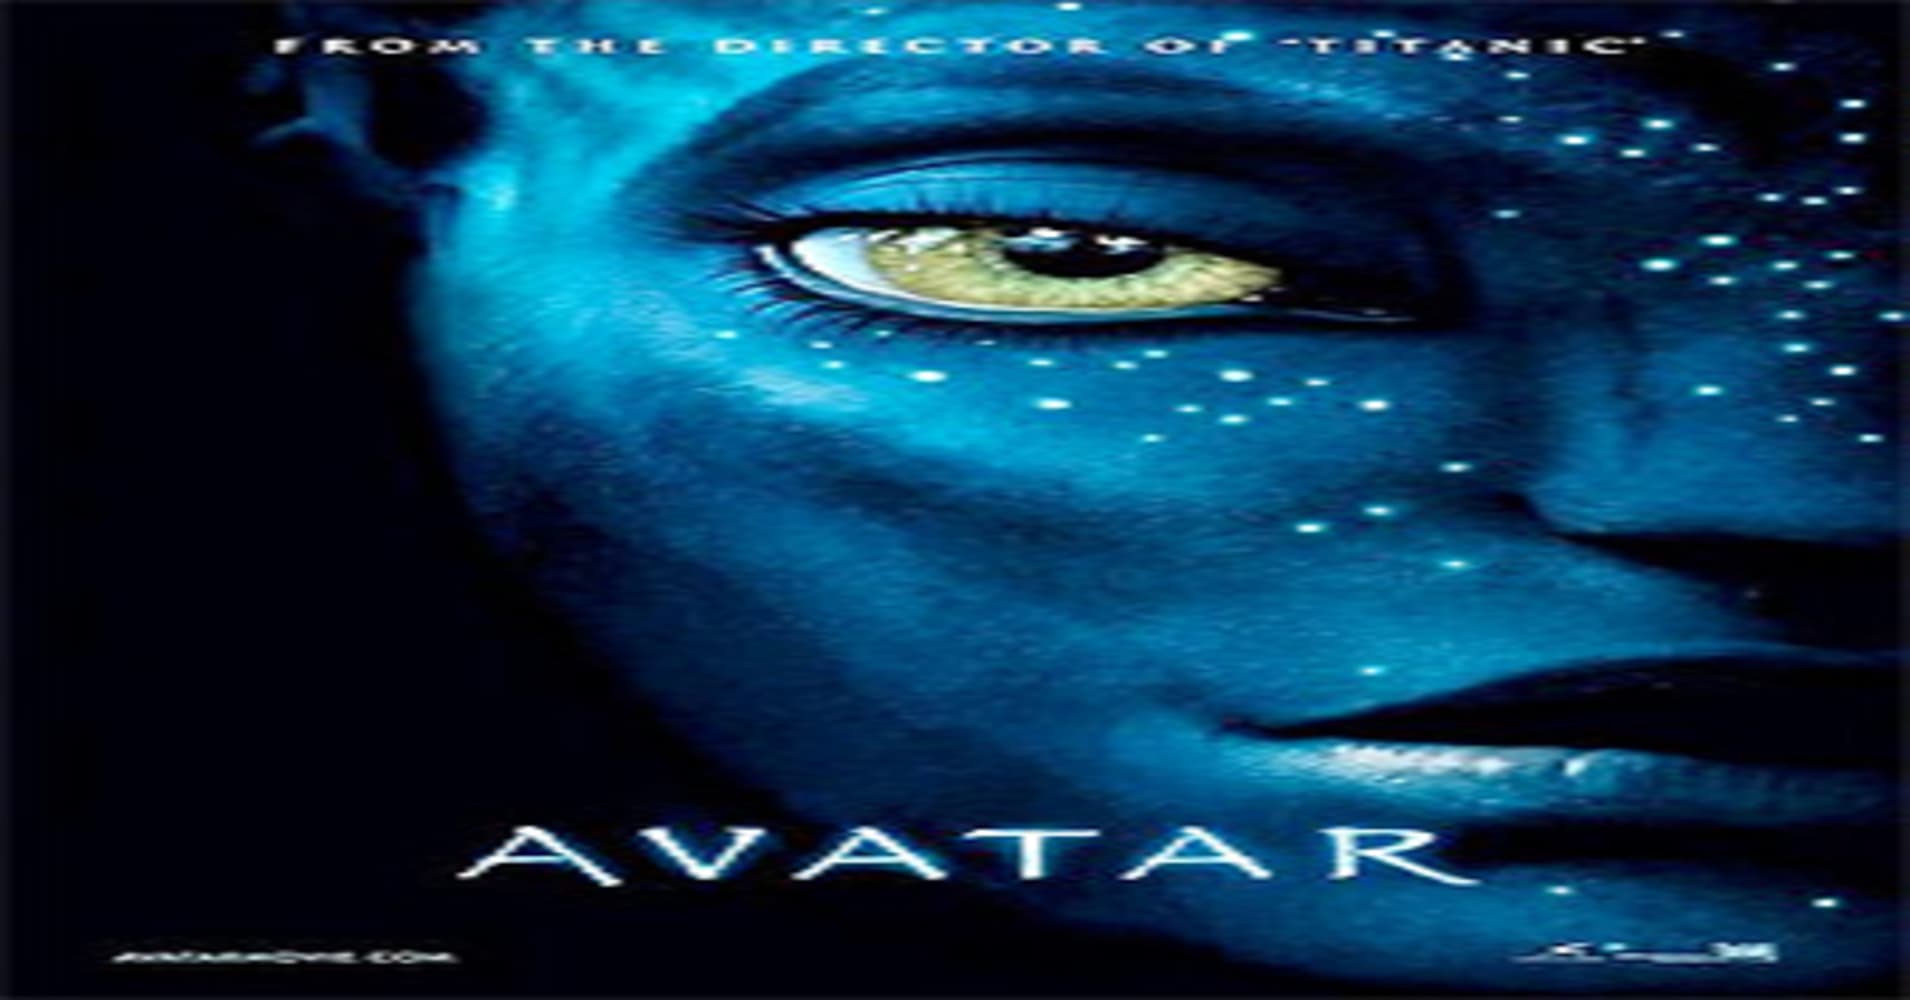 Avatar The Way of Water Simon Franglen  The Soundtrack Gallery Custom  Soundtrack Covers